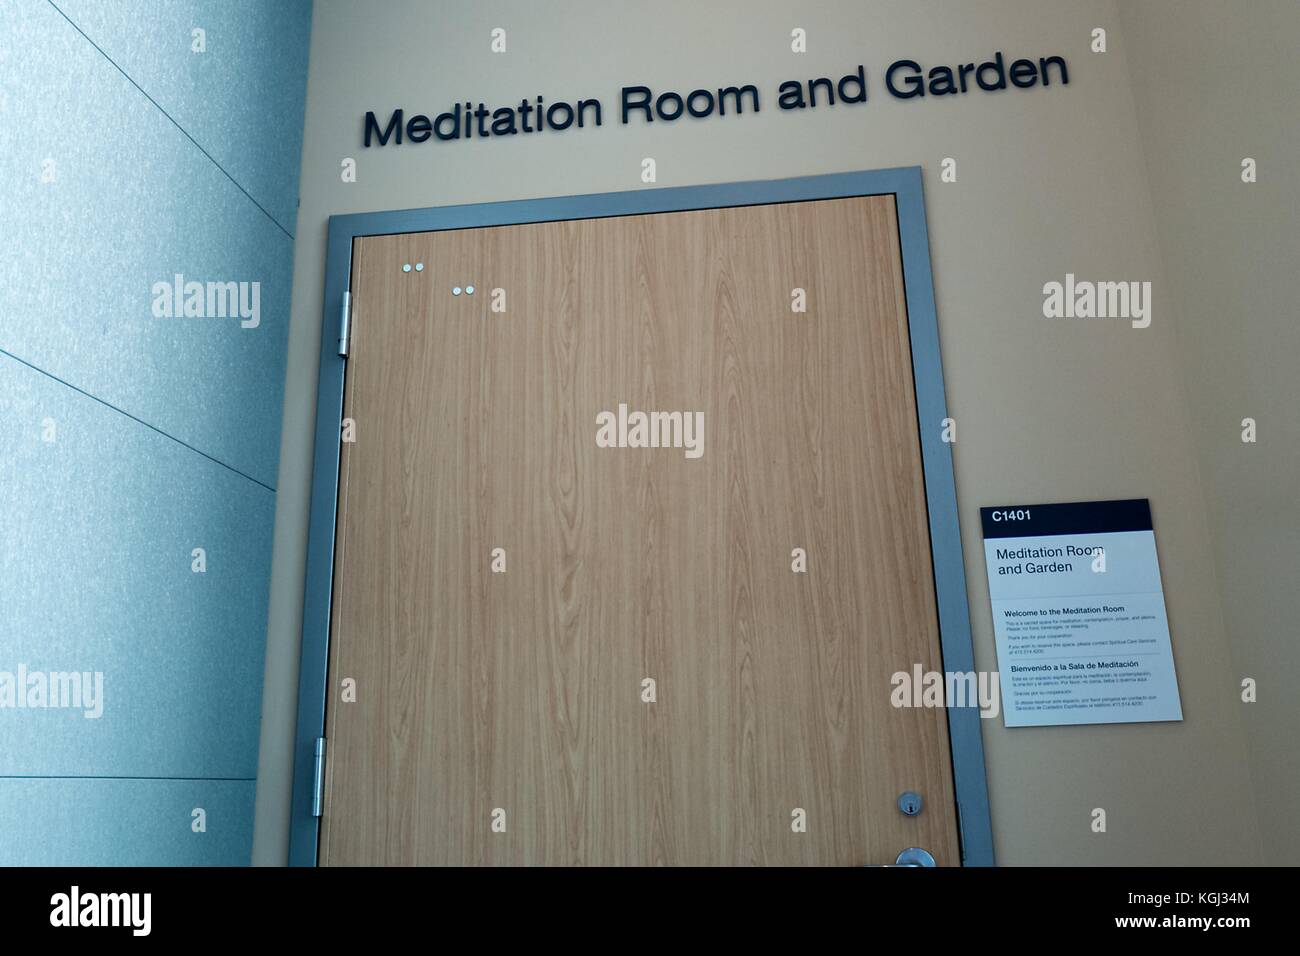 Meditation room and garden, offered to patients at the Mission Bay campus of the University of California San Francisco (UCSF) medical center in San Francisco, California as an alternative to a traditional chapel, September 29, 2017. () Stock Photo